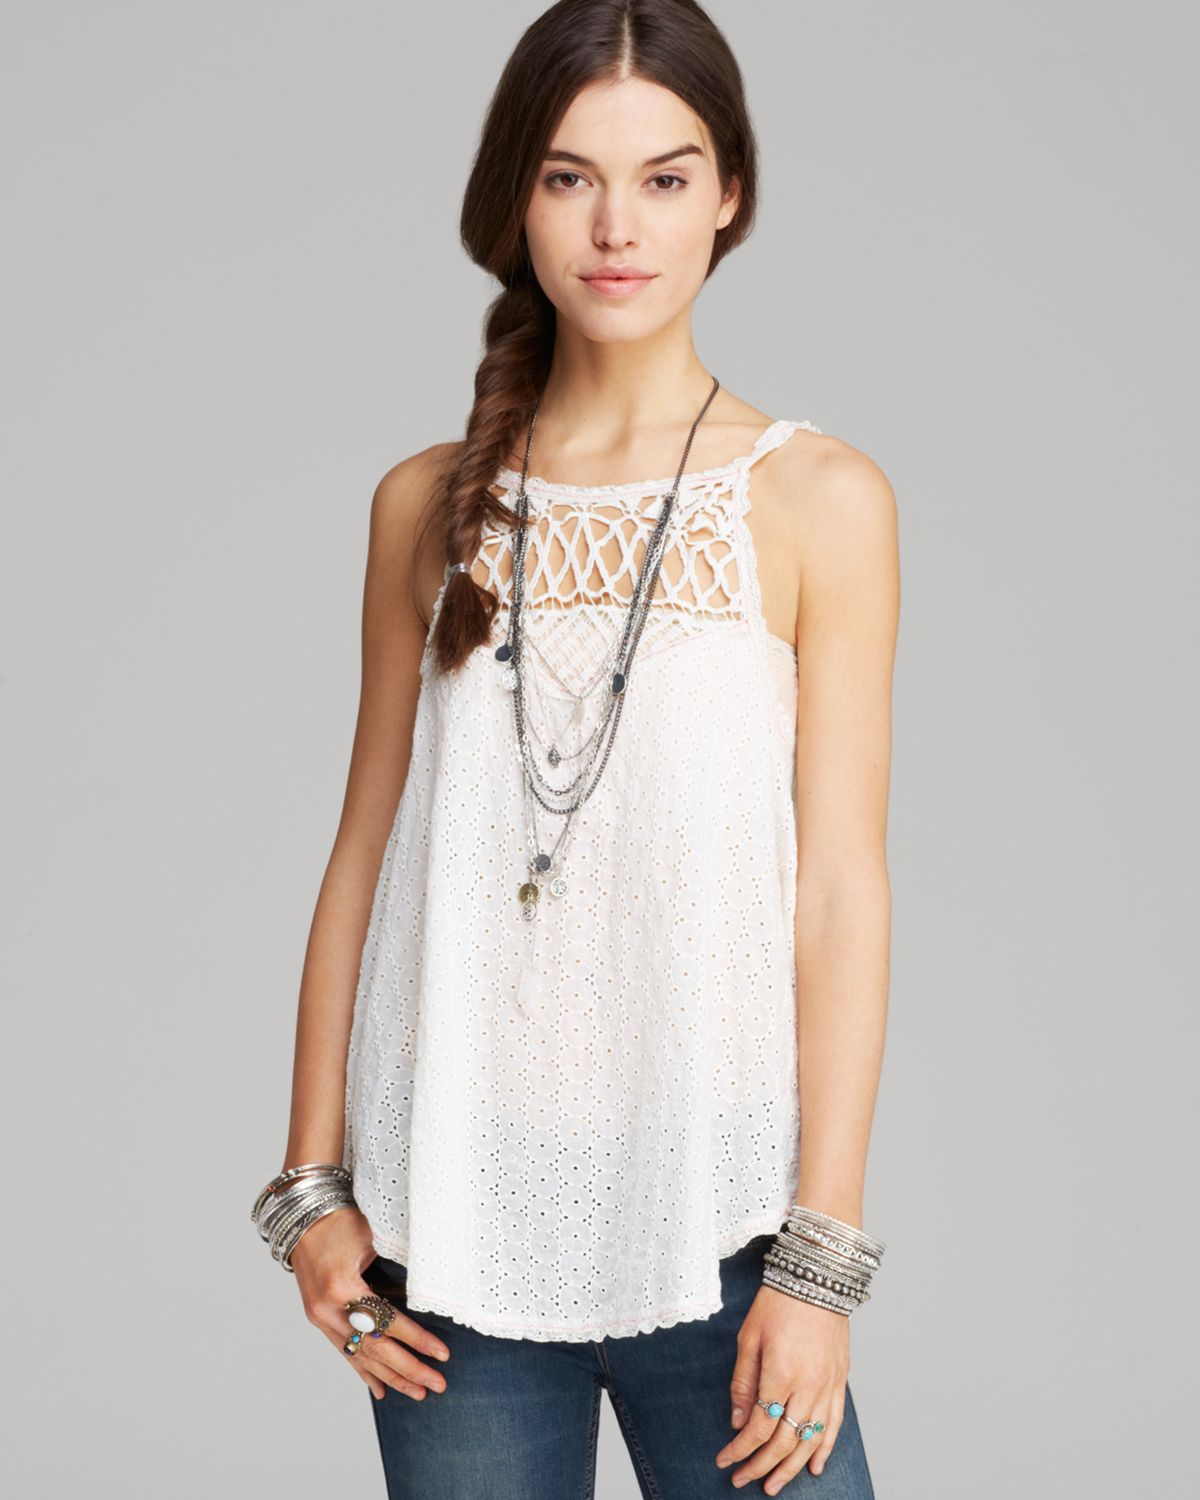 Free People Top - I Got My Eyelet On You in White - Lyst